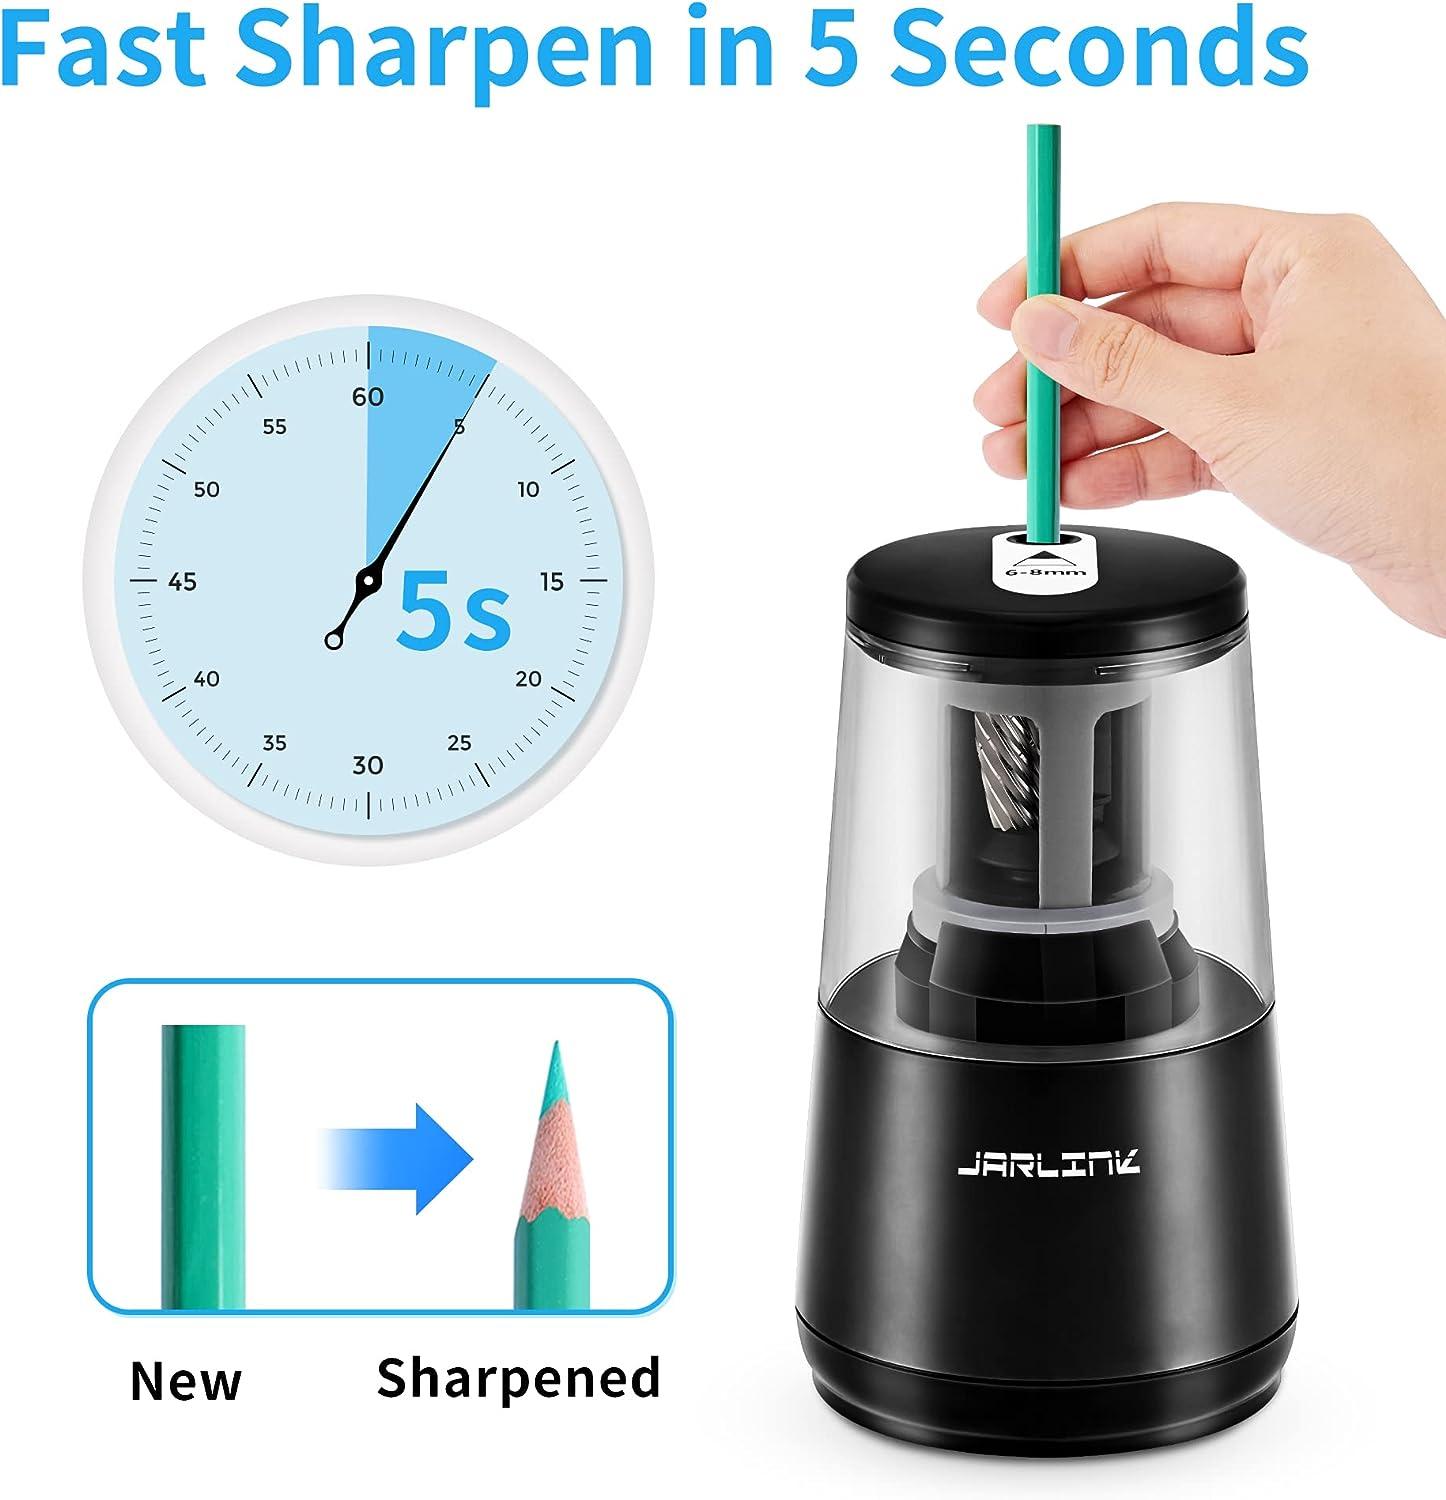 [UPGRADE] Electric Pencil Sharpener Heavy-Duty Helical Blade Colored Pencil Sharpener with Adapter/Battery Operated for No.2/ (6-8mm) Pencils with